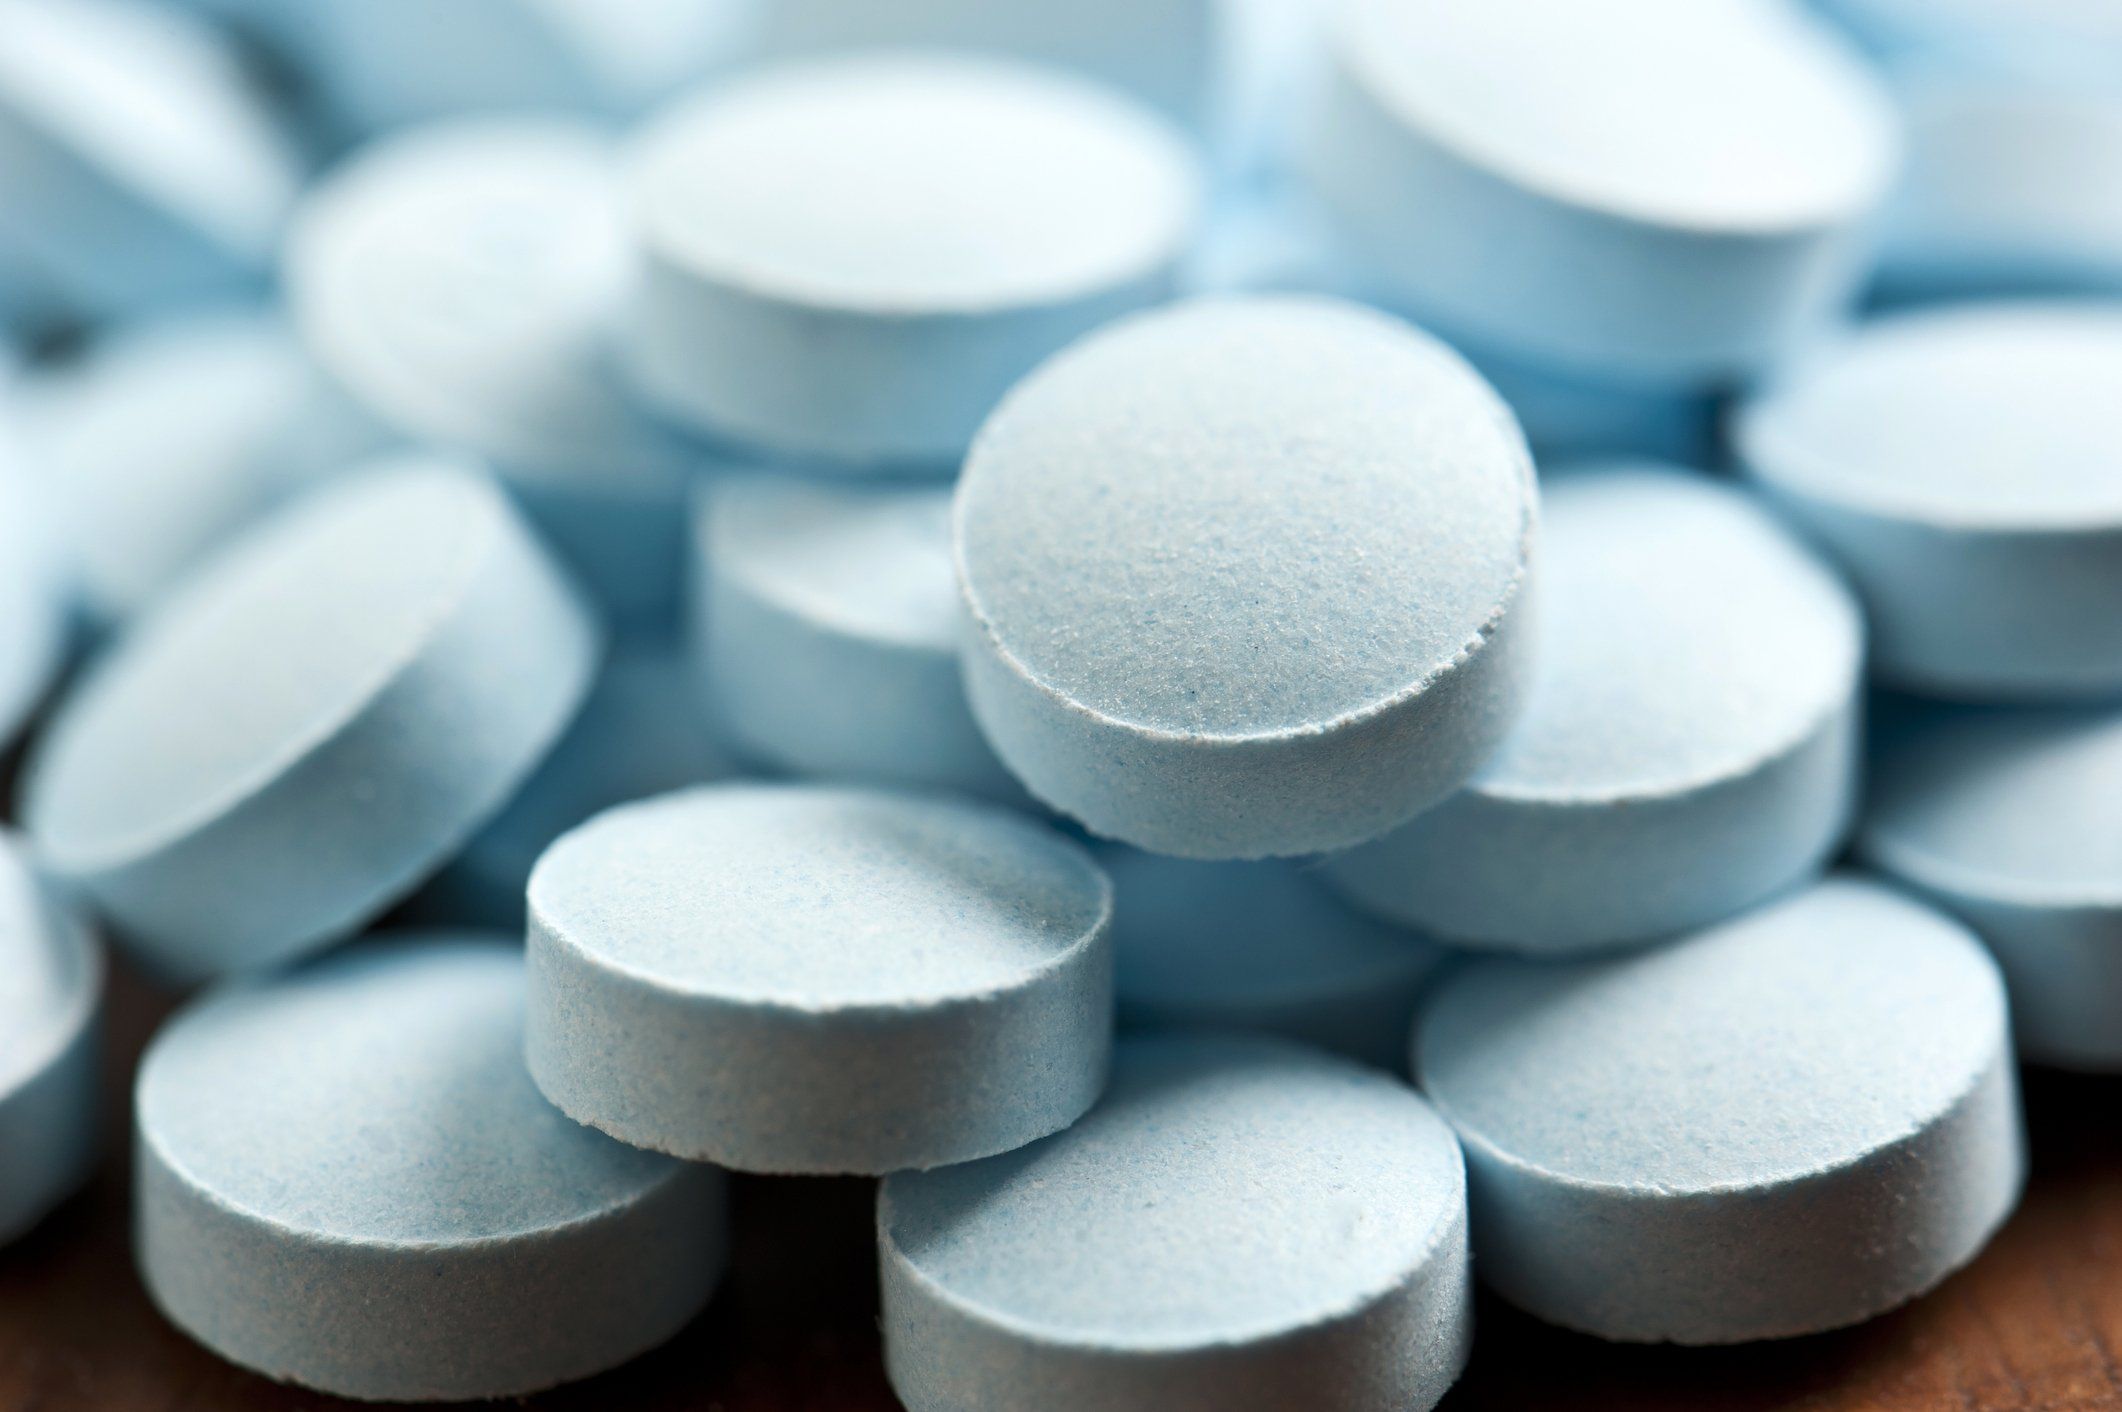 scientists discover that viagra could be secret weapon against alzheimer's